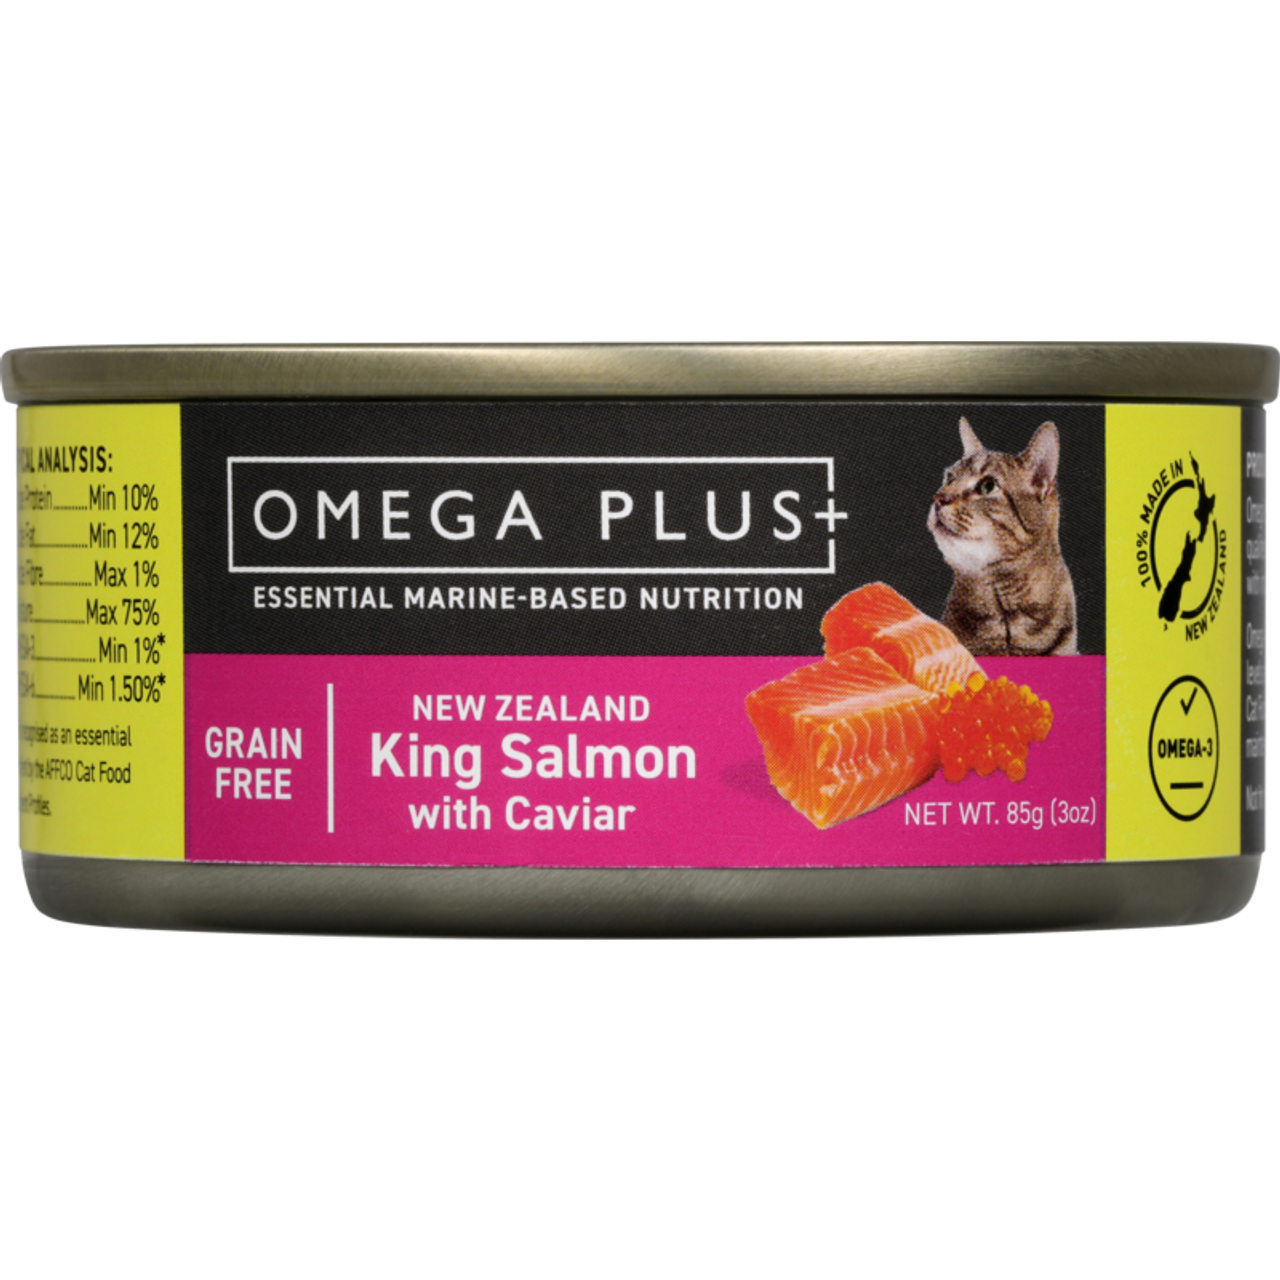 wet cat food with omega 3